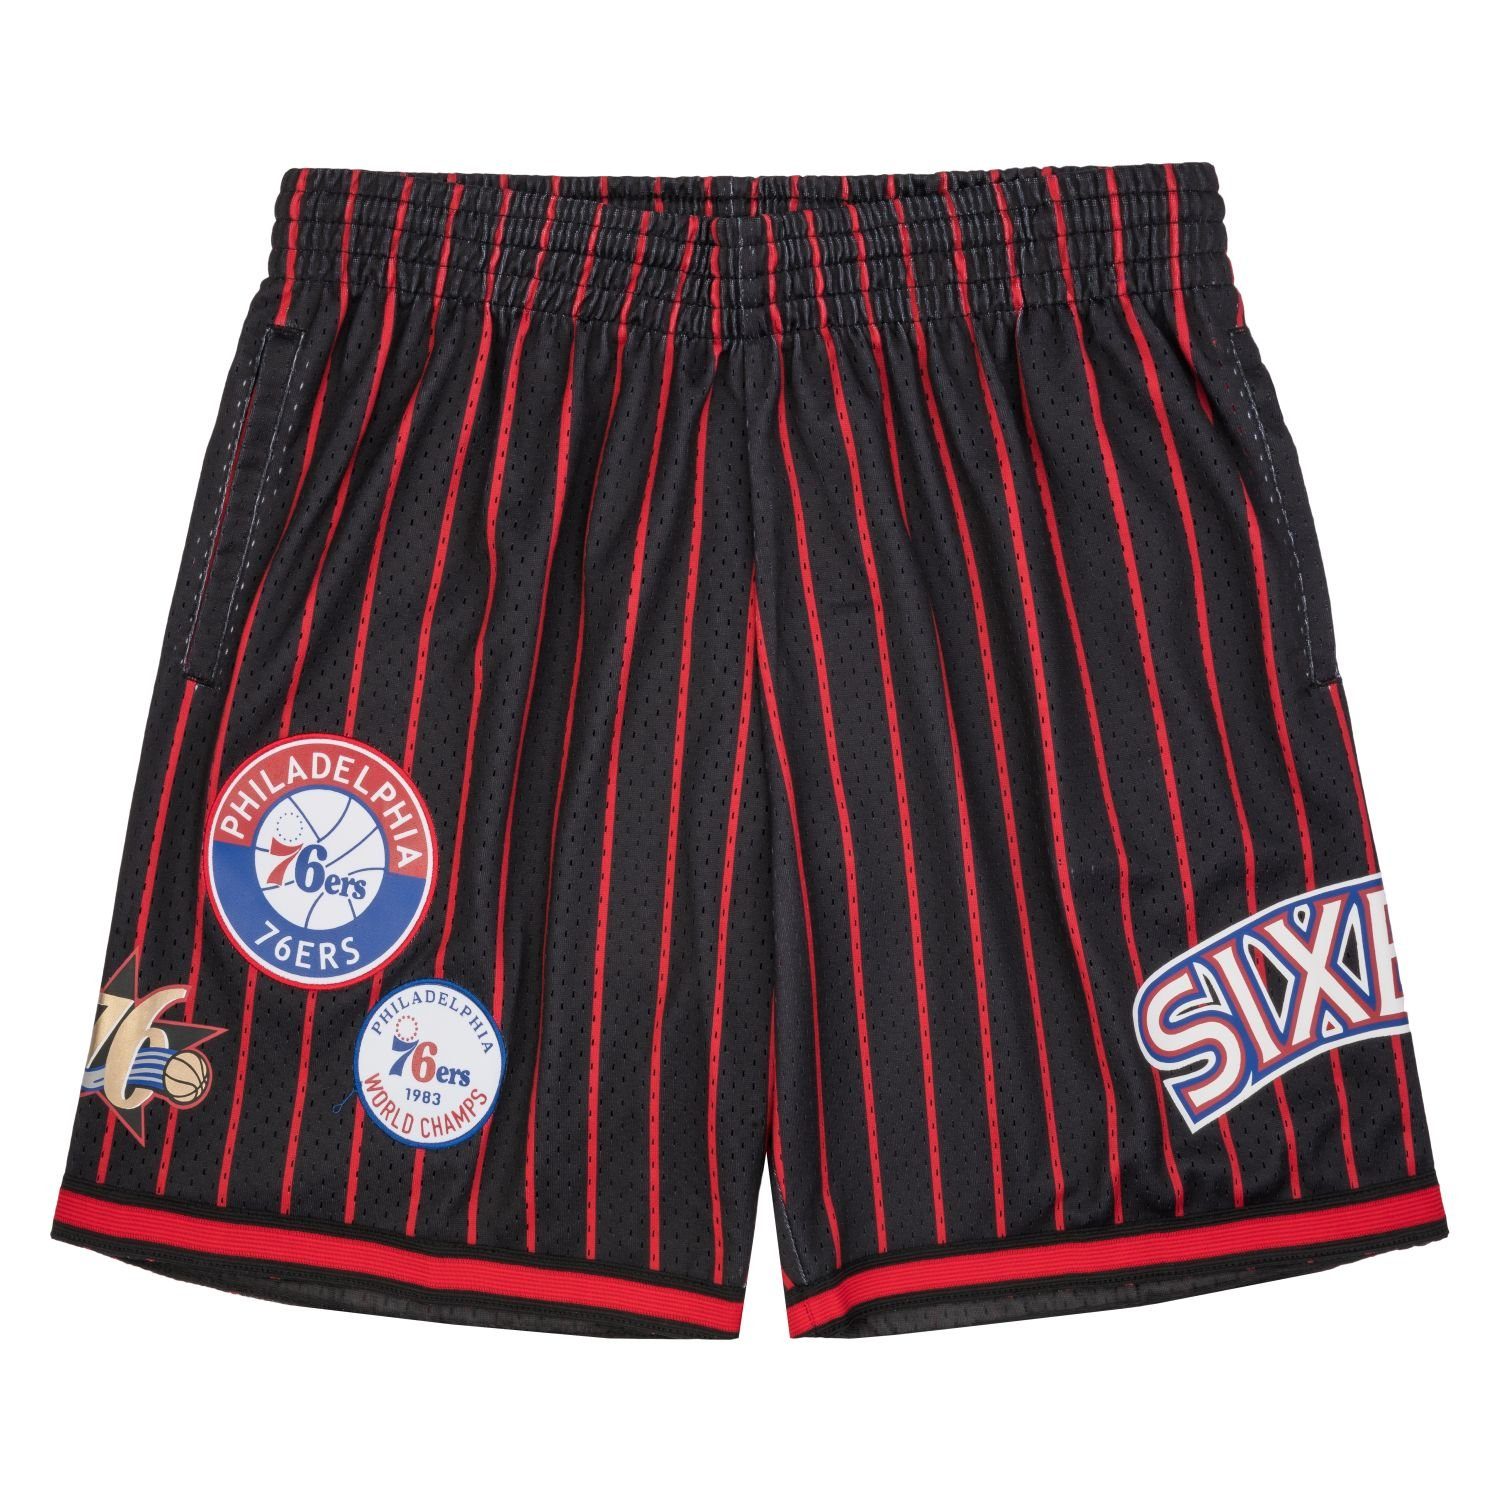 & Mitchell 76ers Shorts Philadelphia Ness Collection